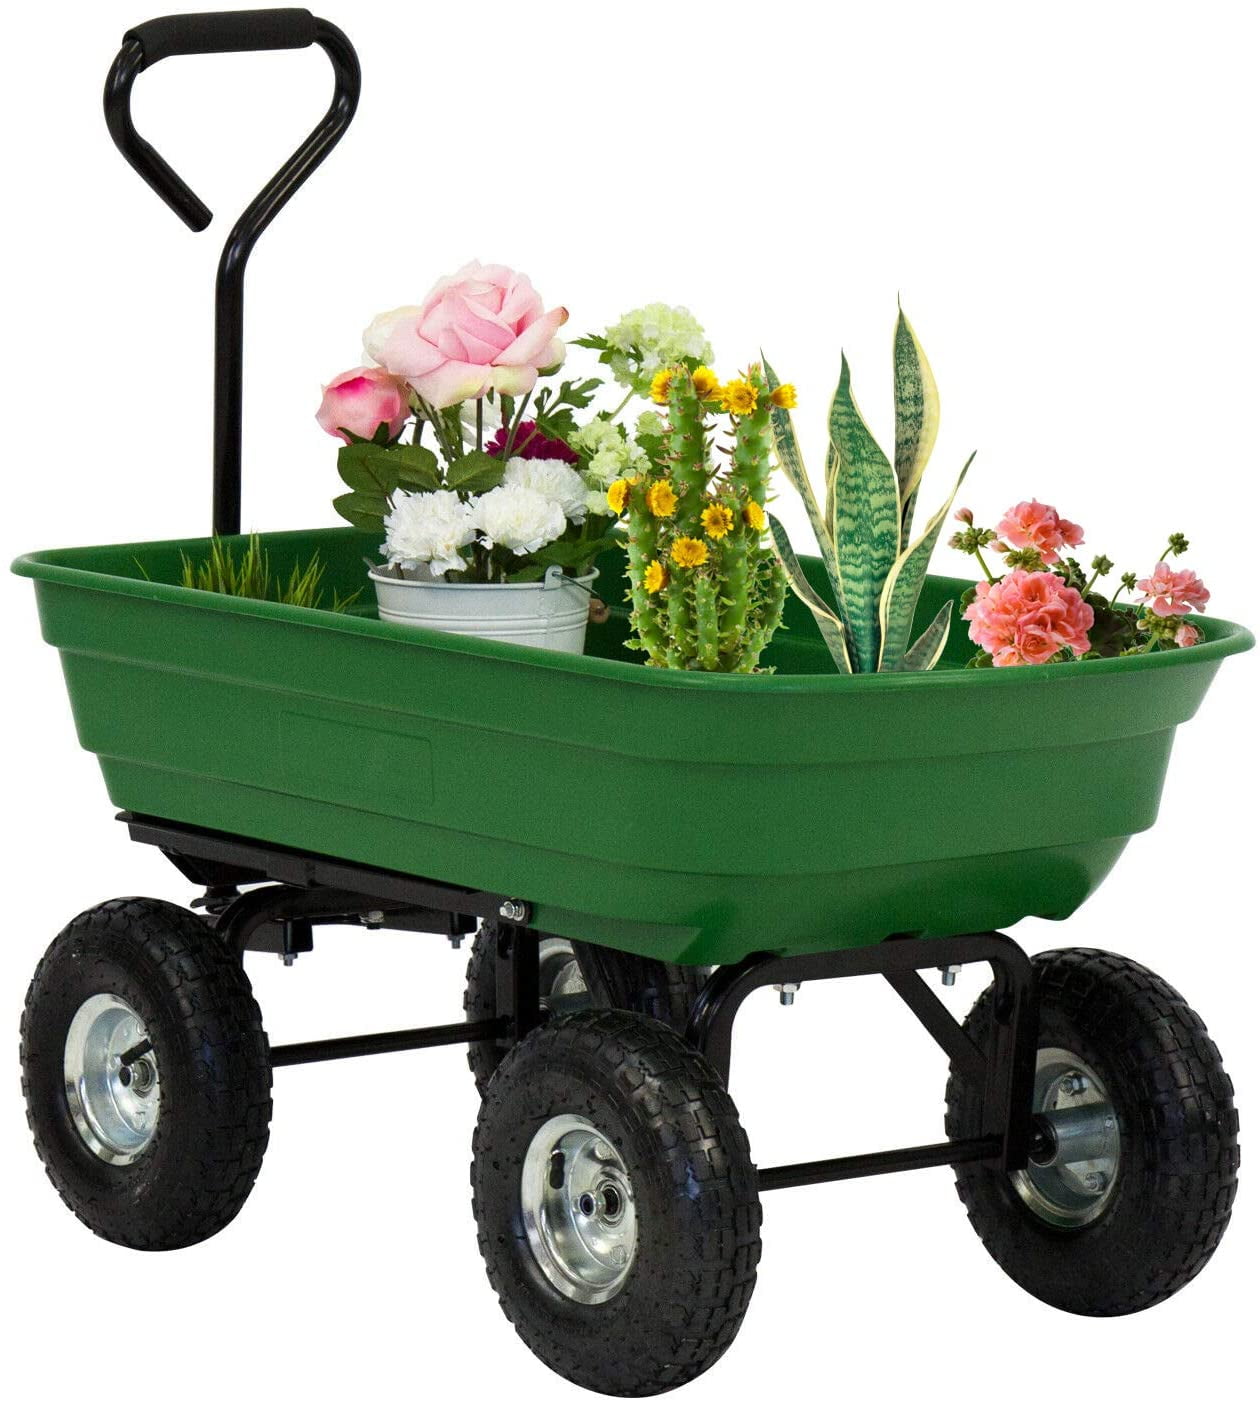 Green ZeHuoGe Green Cart Poly Pulling Wagon Garden Dump Cart Wagon Carrier 4 Rugged Wide-Track Air Tires with Heavy Duty Steel Frame & 10 Pneumatic Tires 300Lbs Capacity